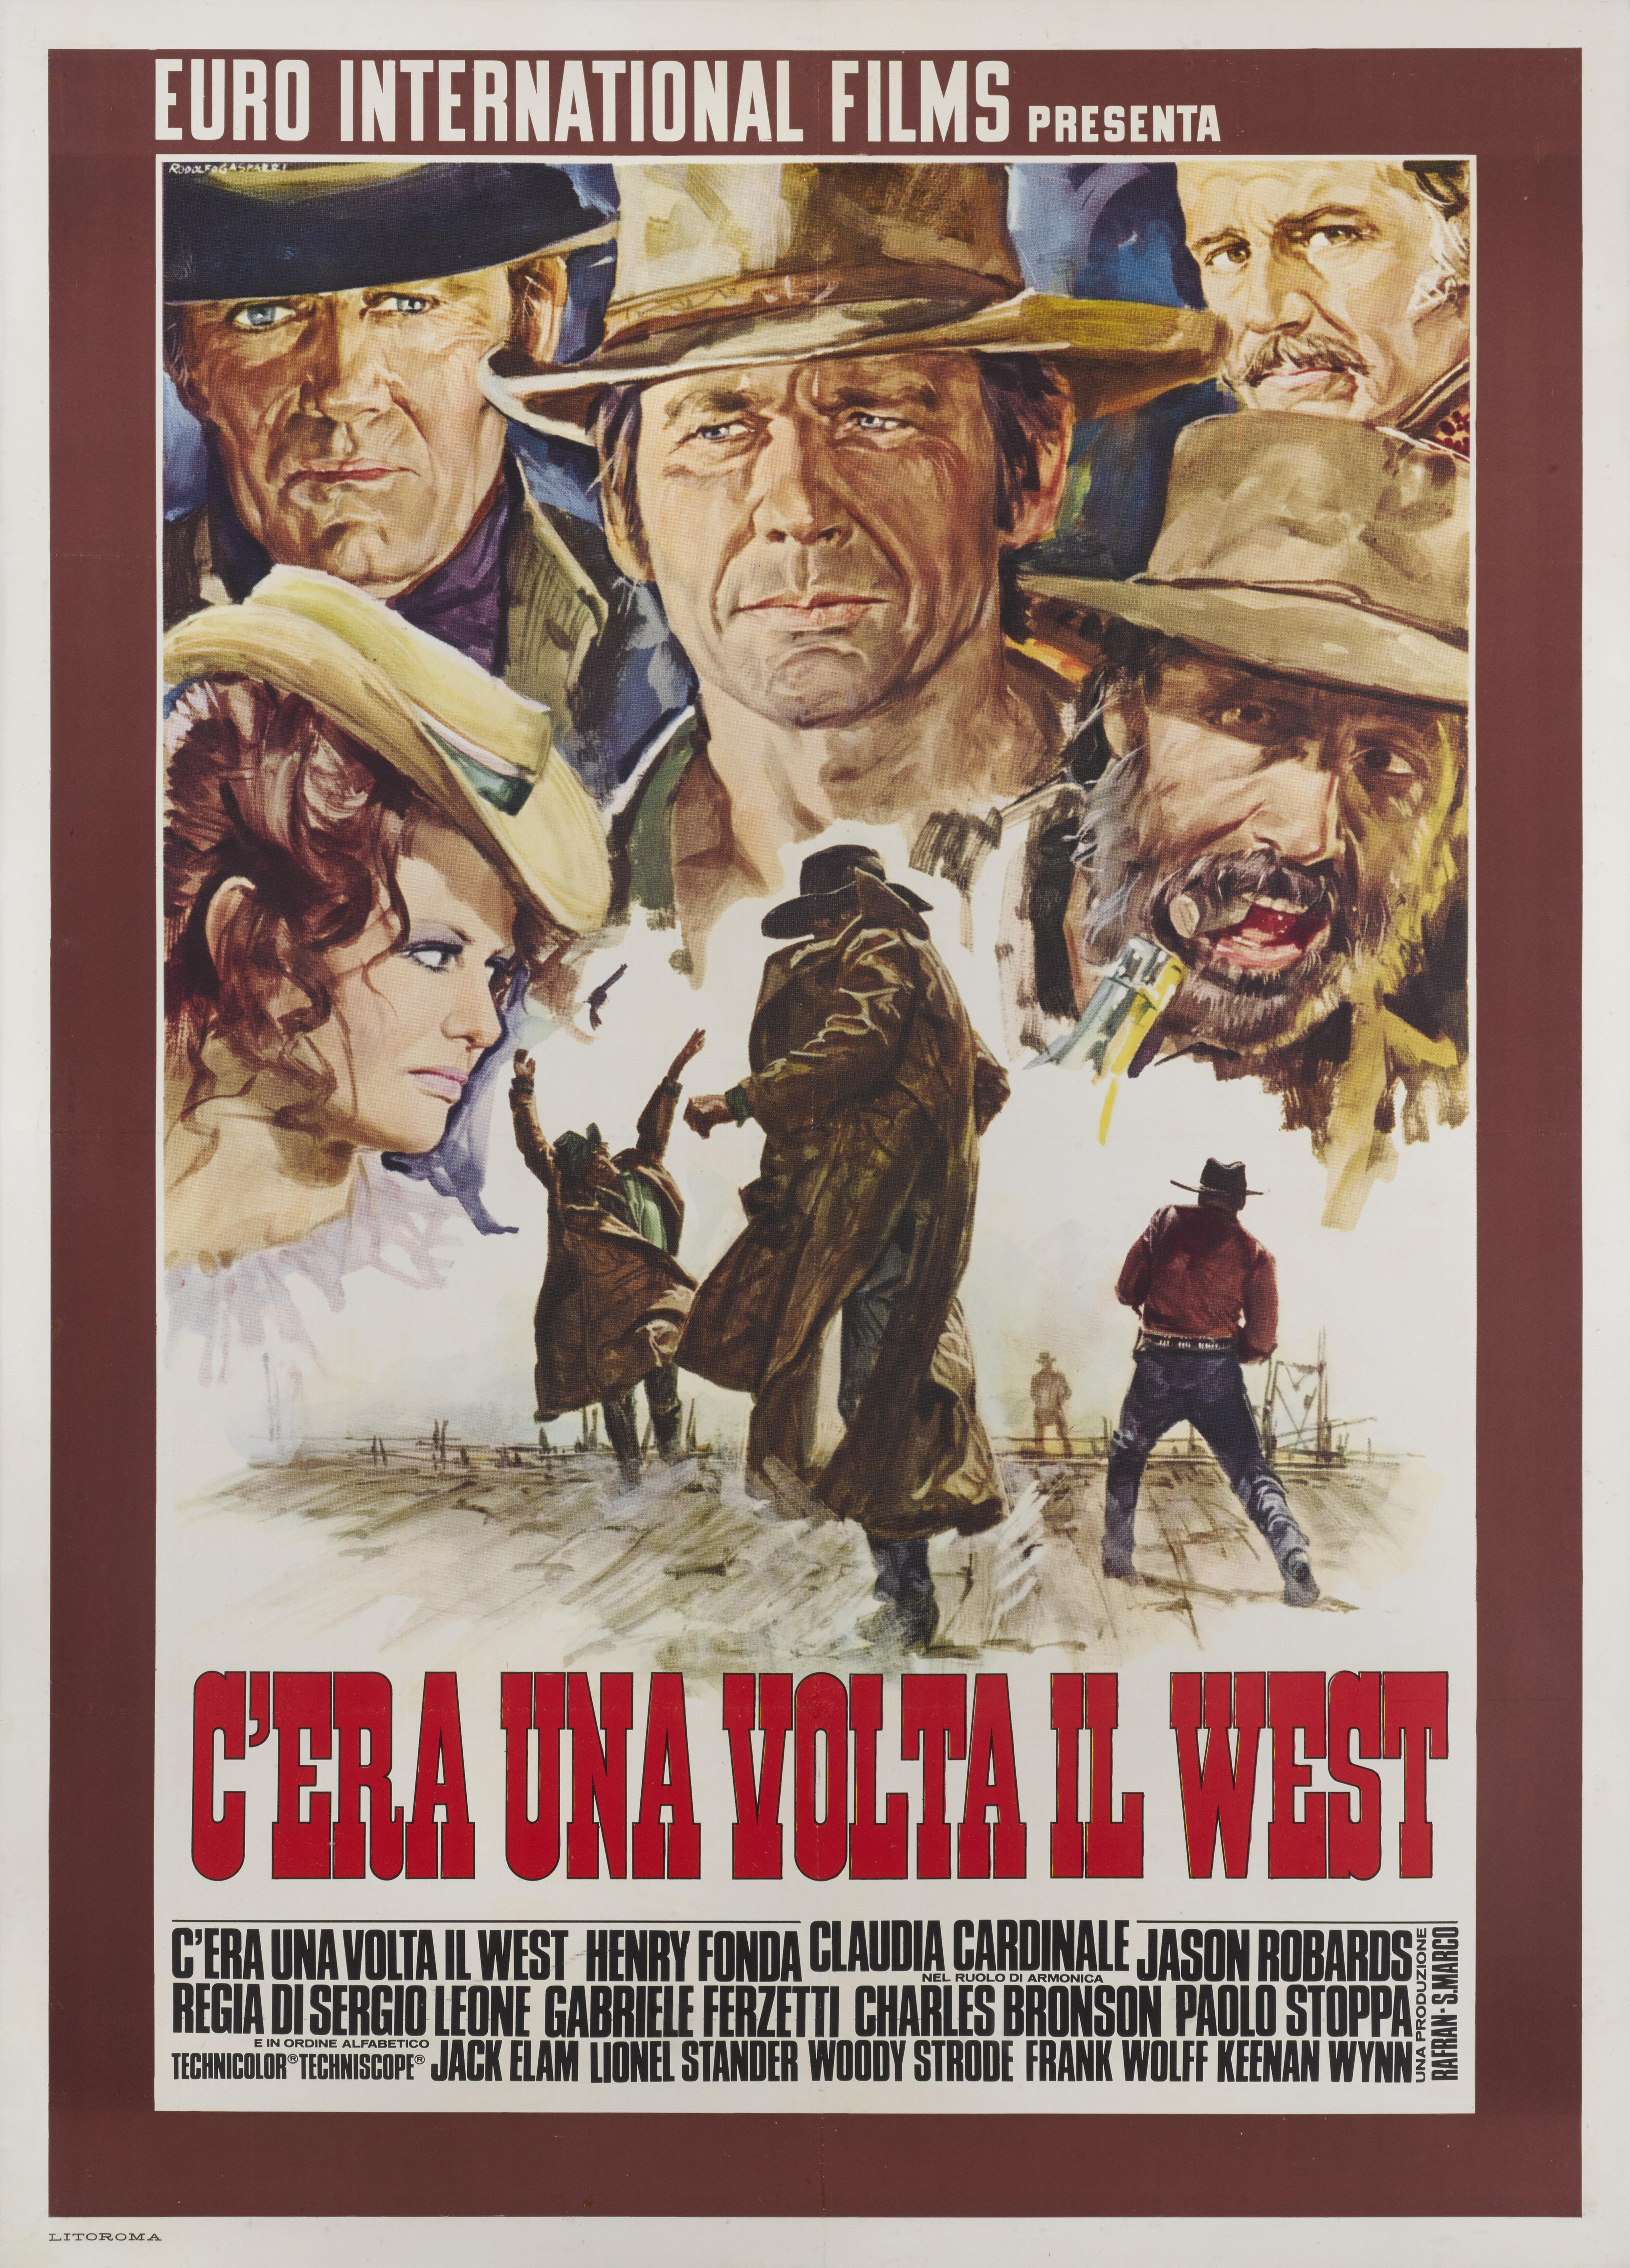 Original Italian film poster for Once Upon a Time in the West (1969)
This Spaghetti Western was directed and co-written (with Sergio Donati) by Sergio Leone, and the score by Ennio Morricone. The film stars Henry Fonda, Charles Bronson, Jason